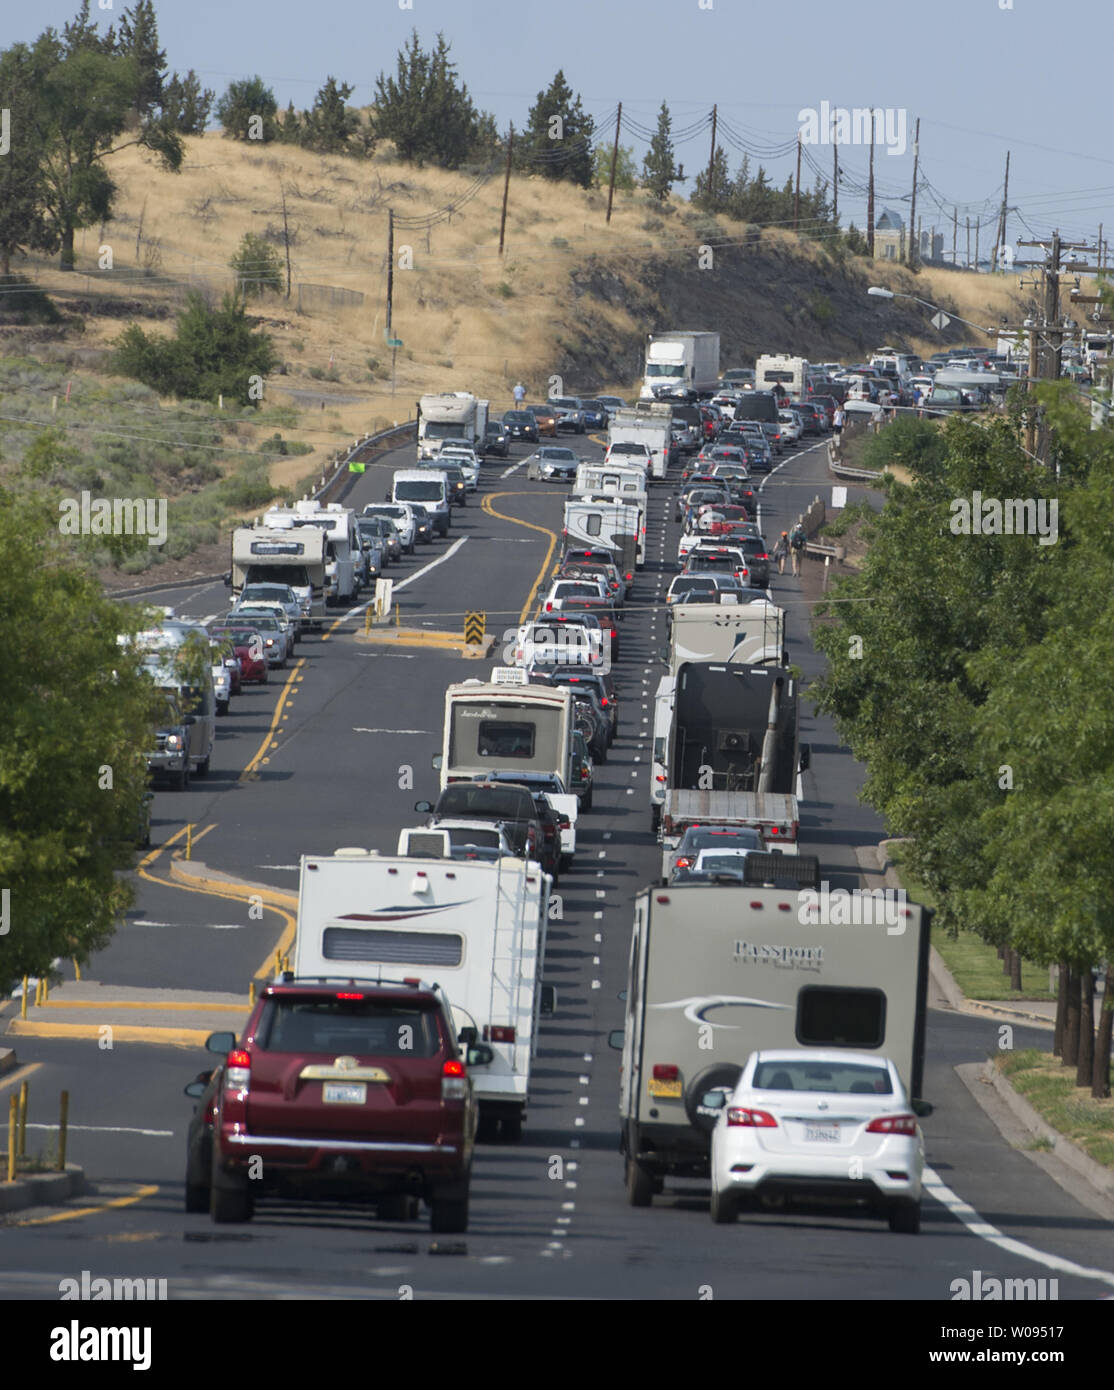 https://c8.alamy.com/comp/W09517/post-eclipse-exodus-brings-traffic-to-stop-and-crawl-in-madras-oregon-on-august-21-2017-highway-97-south-moved-less-than-5-mph-for-hours-tens-of-thousands-from-all-over-the-world-descended-on-this-little-town-to-witness-the-total-solar-eclipse-photo-by-terry-schmittupi-W09517.jpg